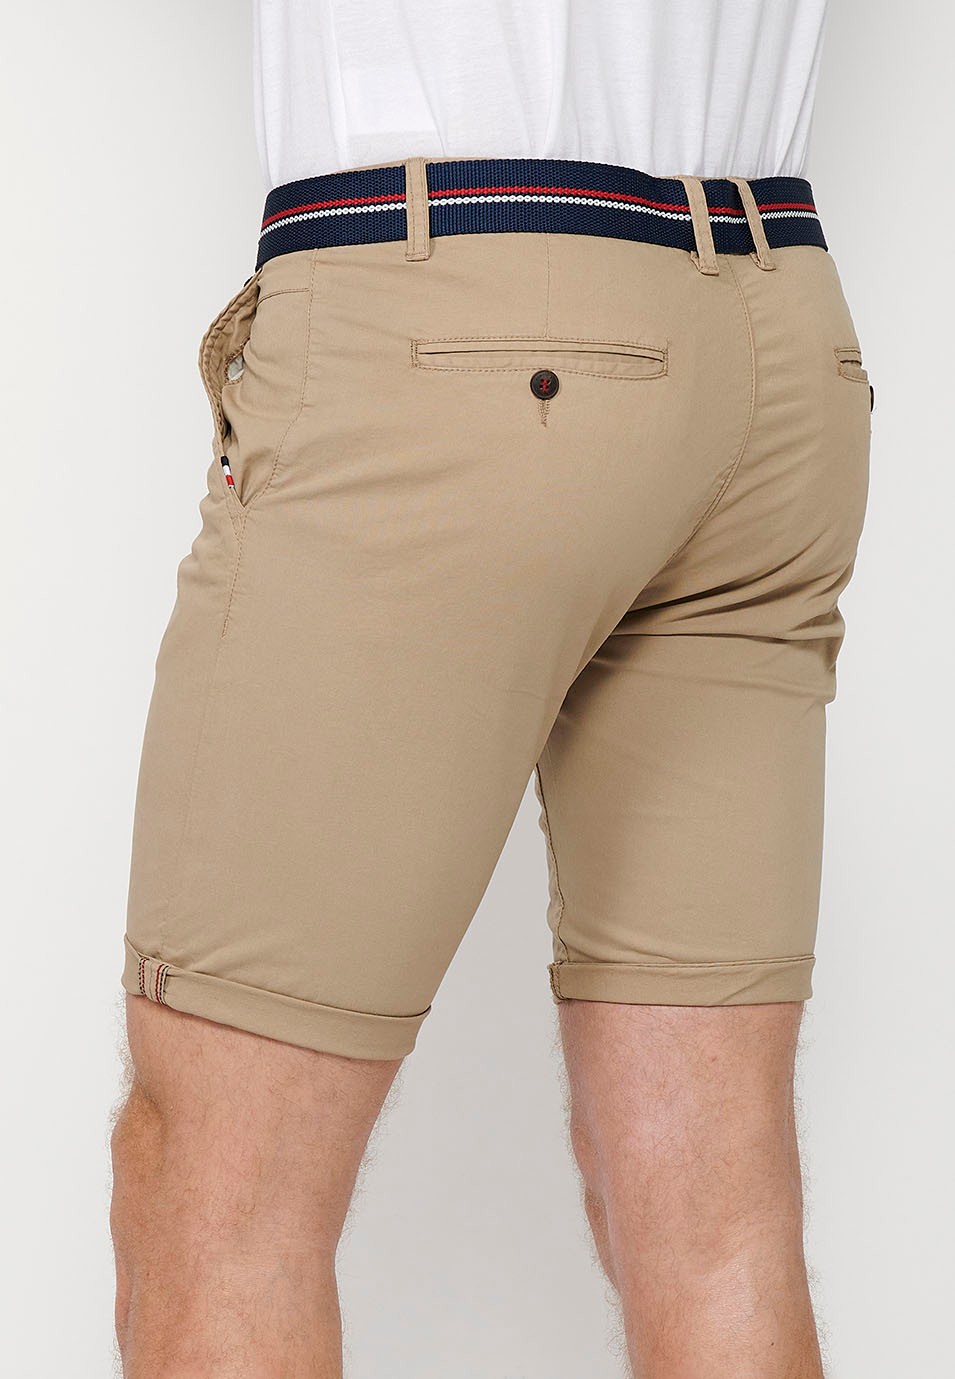 Shorts with a turn-up finish with front closure with zipper and button and belt in Beige Color for Men 6